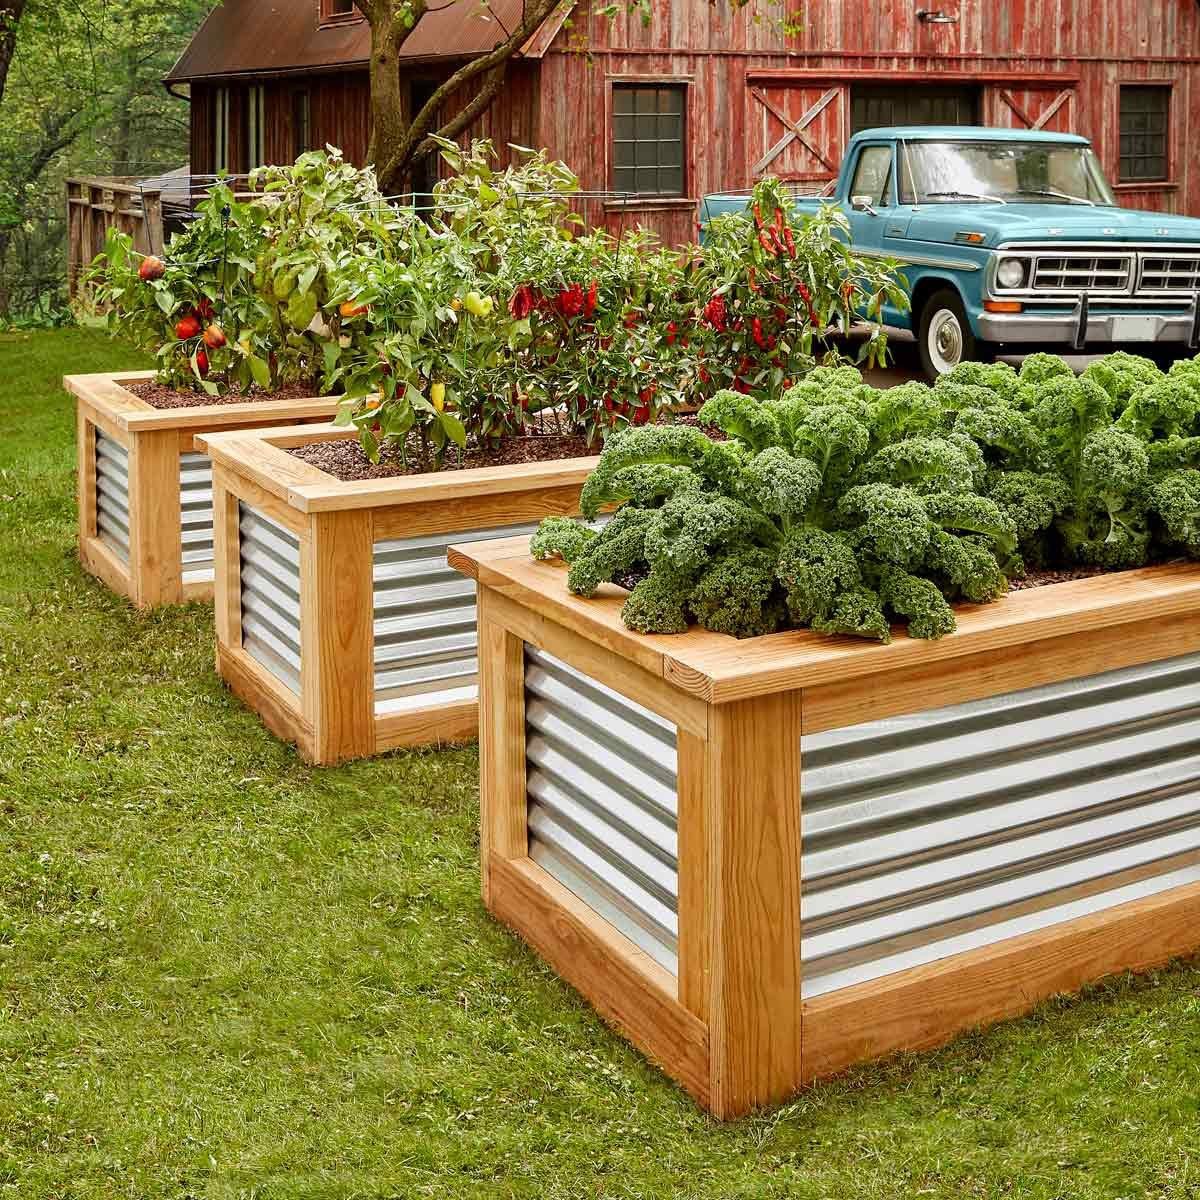 The Best Raised Garden Beds to Buy Right Now